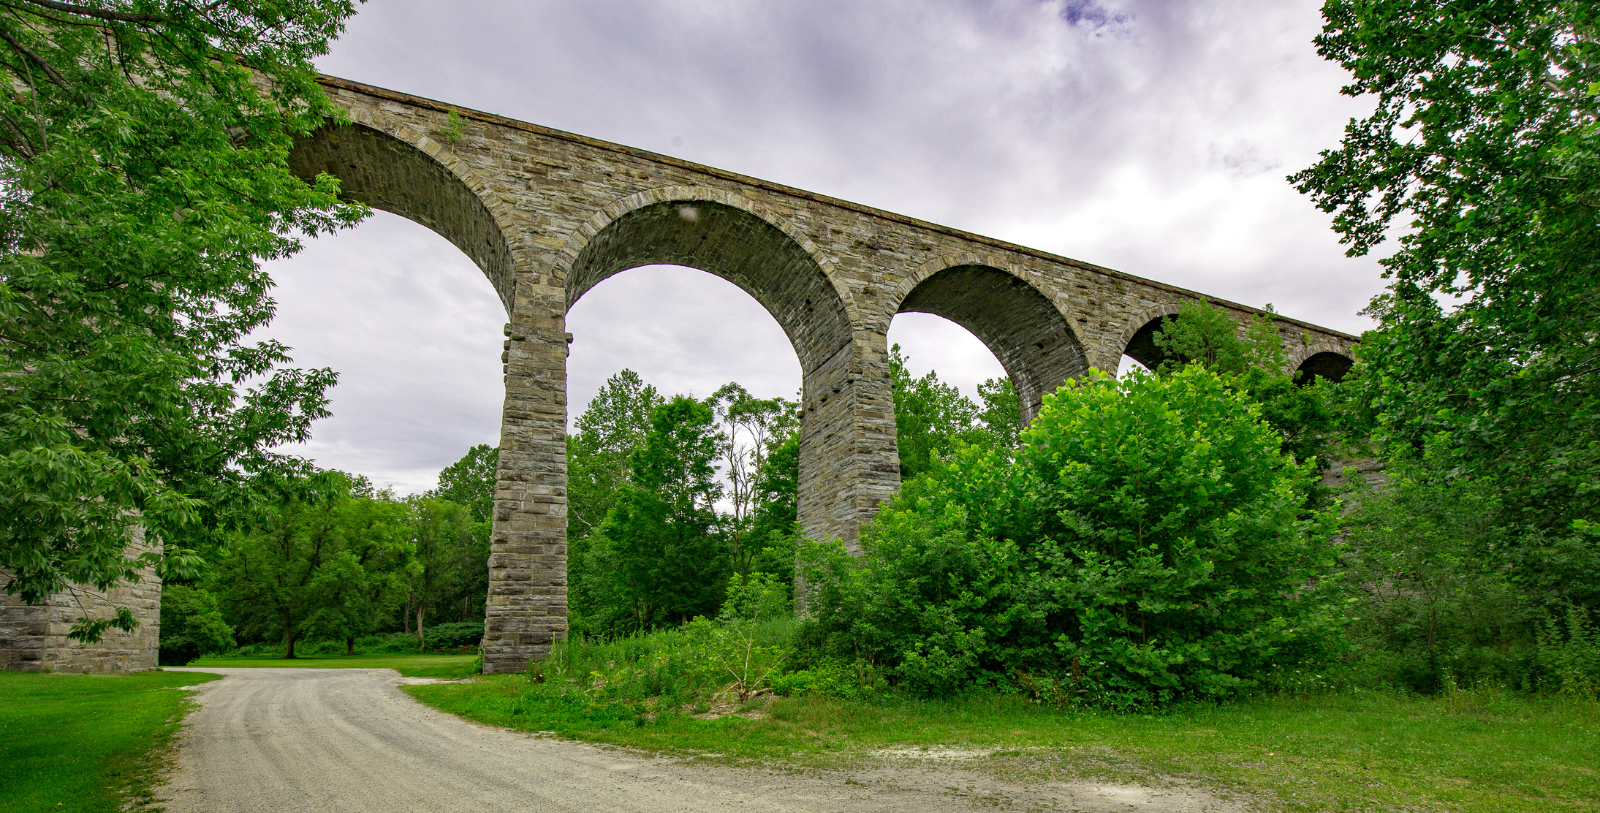 Image of Starrucca Viaduct near The Chestnut Inn, 1927, Member of Historic Hotels of America since 2023, in Deposit, New York